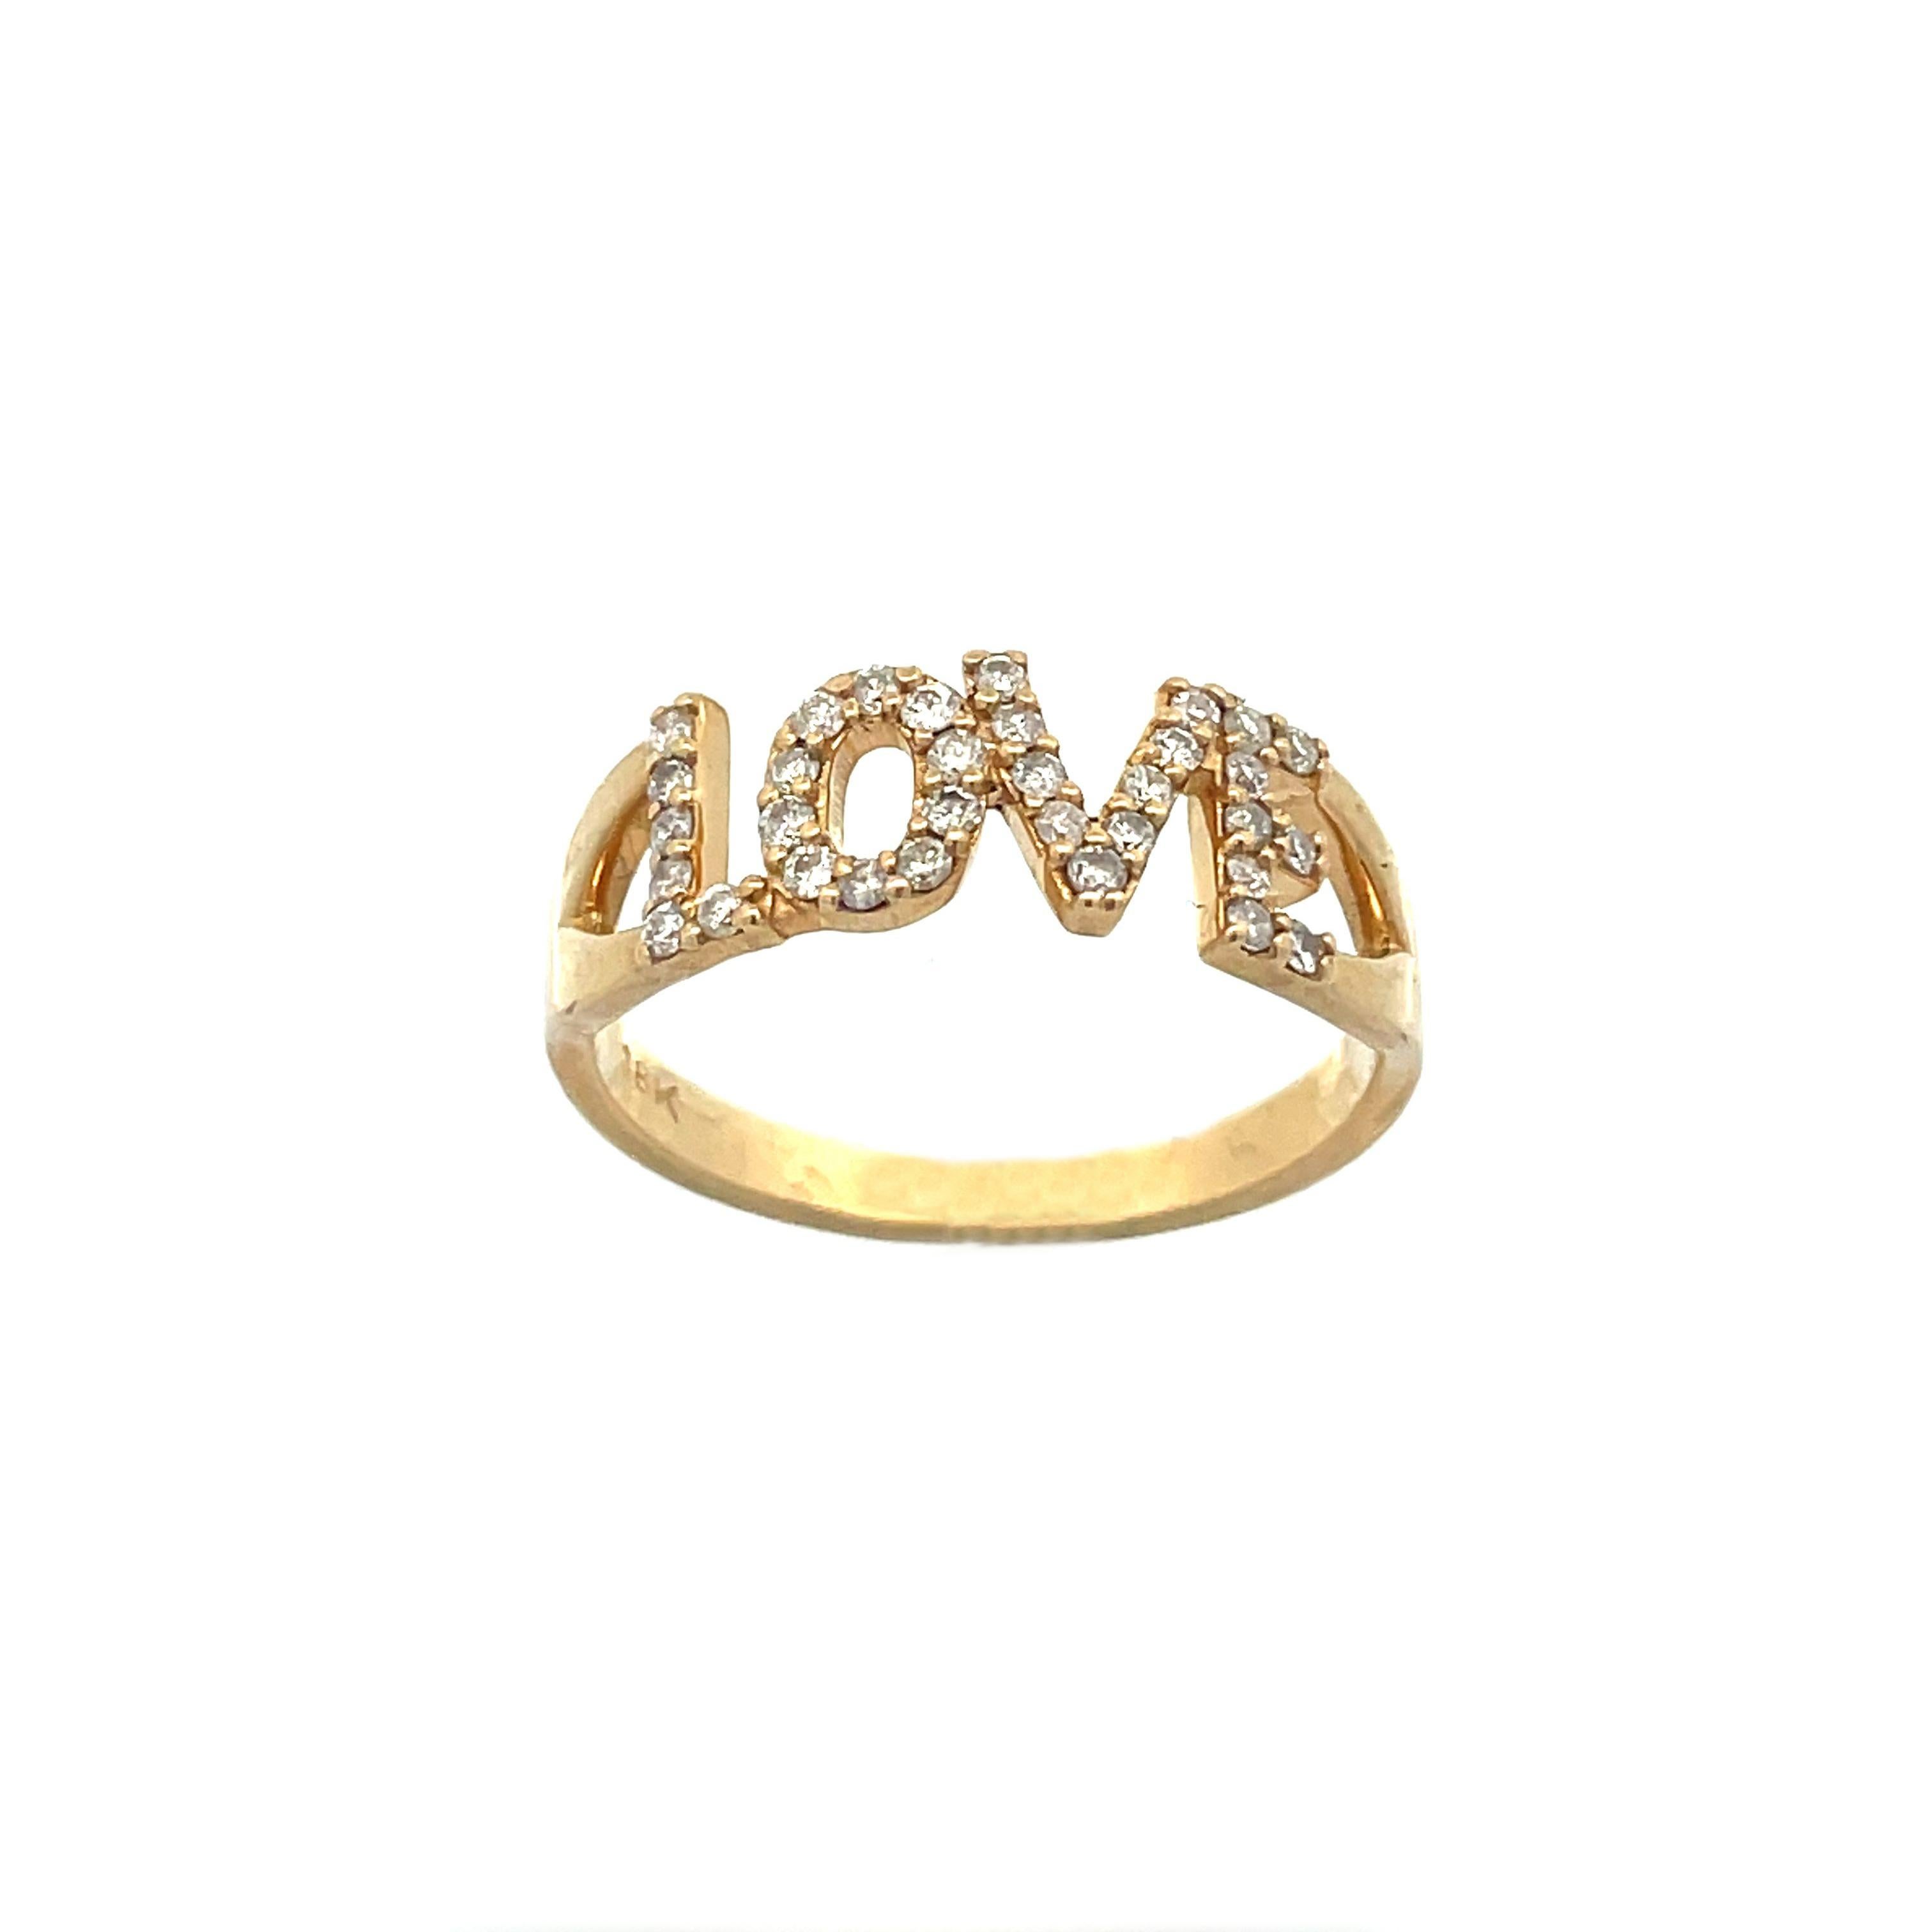 This is a beautiful Contemporary ring crafted in 18K yellow gold that showcases a sparkling collection of diamonds that spell 